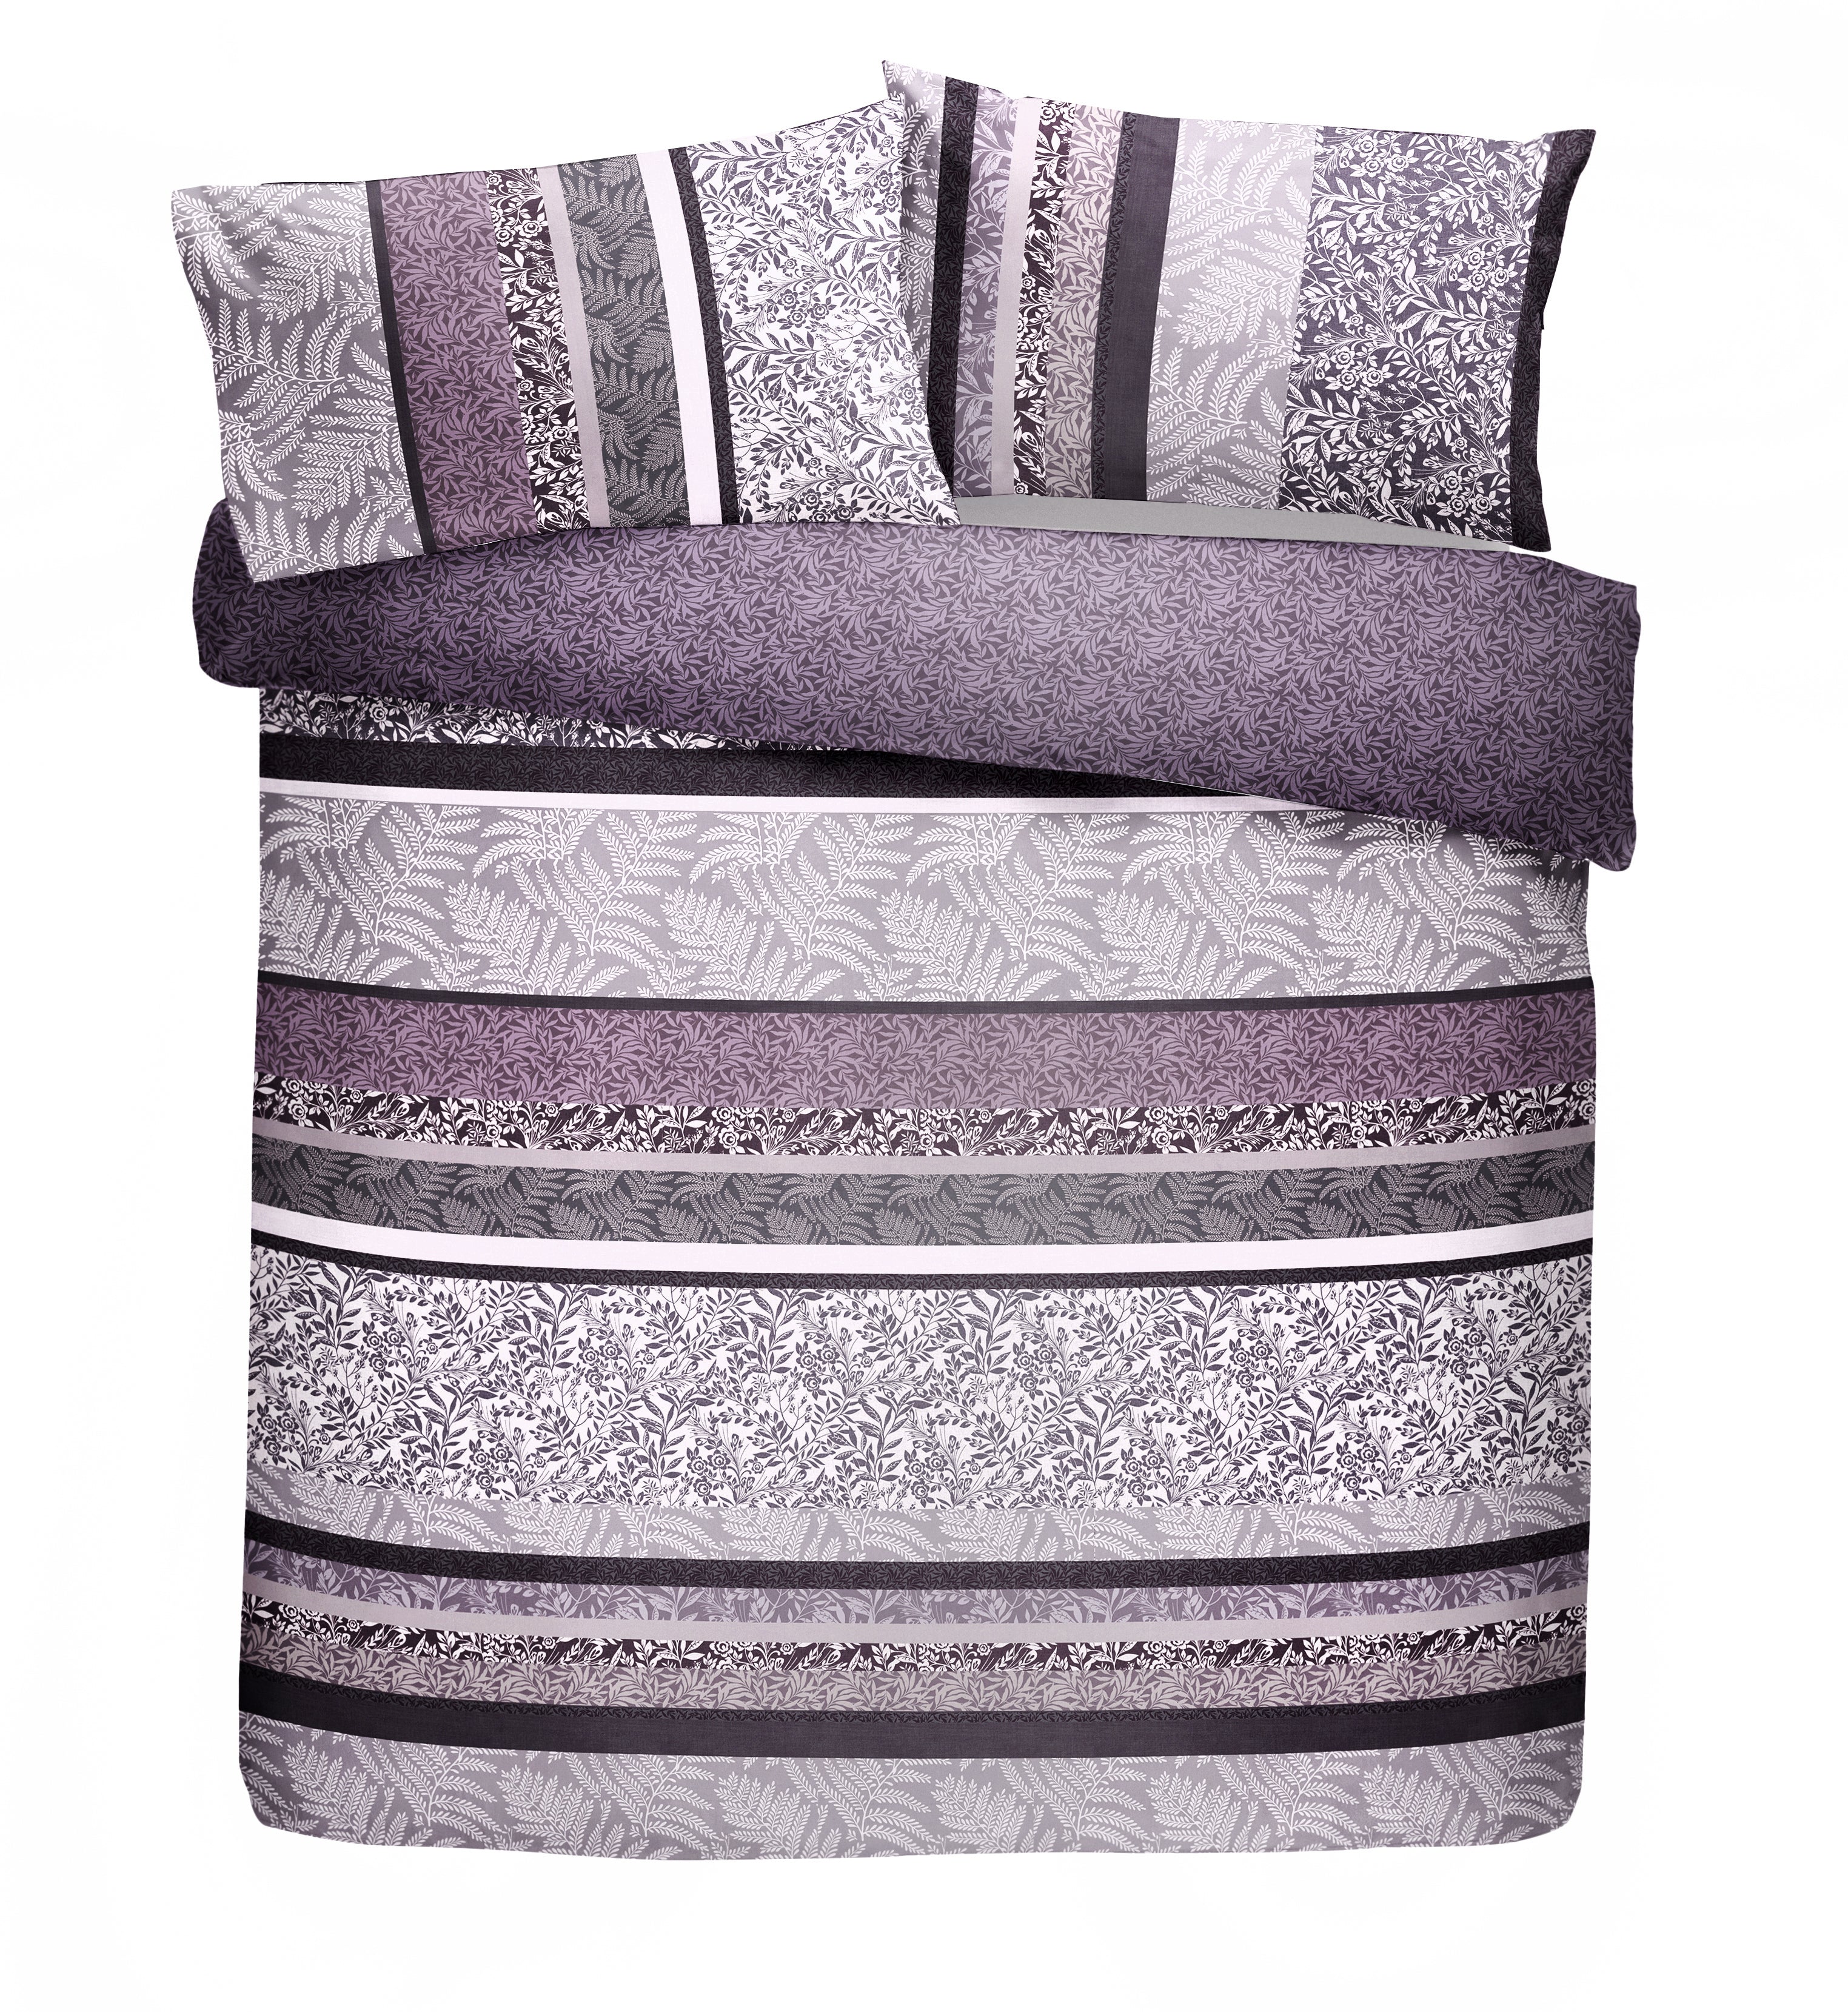 Hanworth Heather - Easy Care Bedding & Curtains - by D&D Design